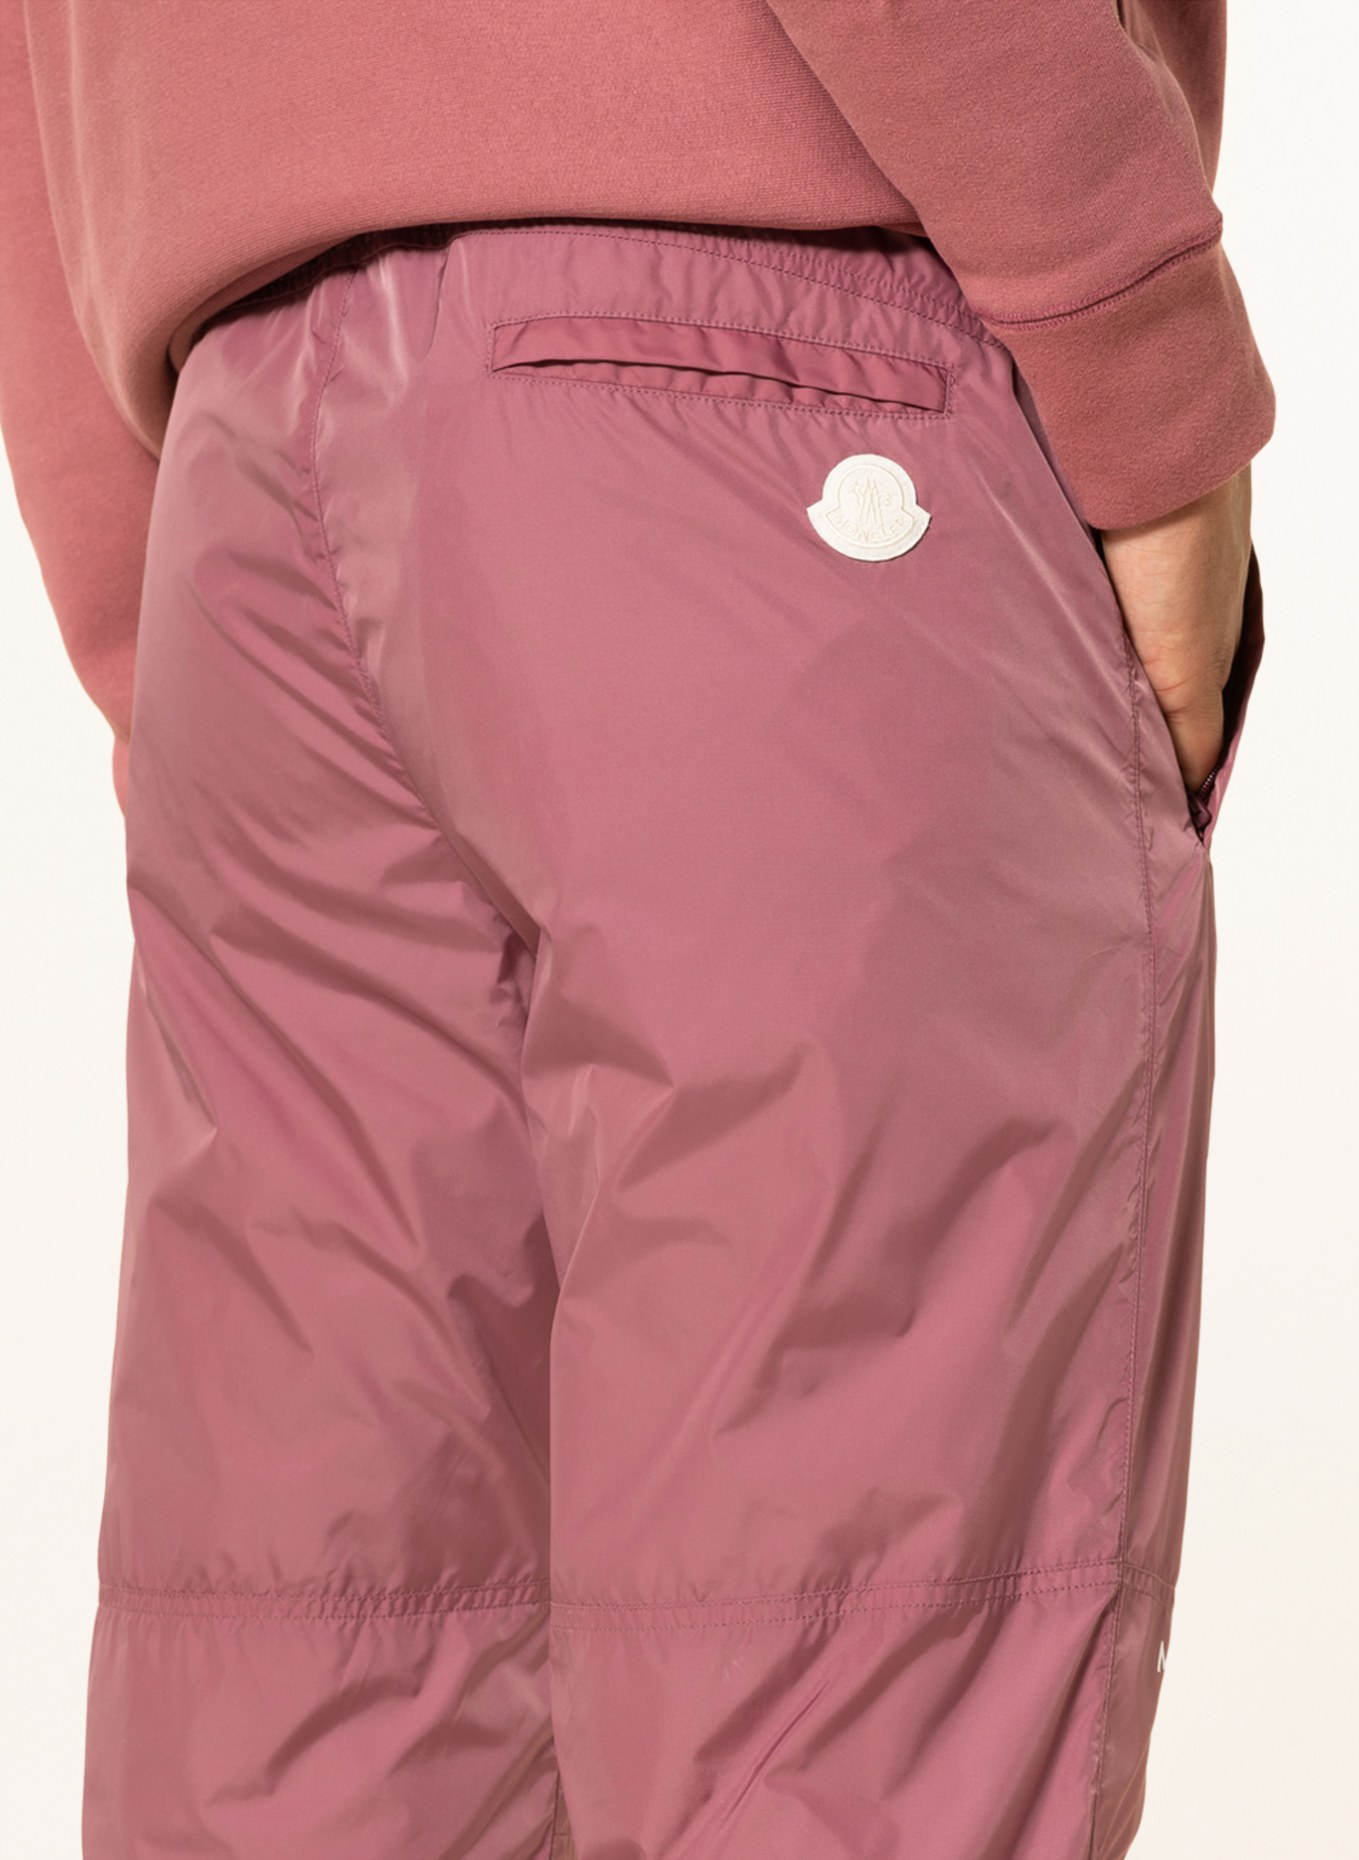 MONCLER GENIUS Trousers in jogger style , Color: DUSKY PINK (Image 6)